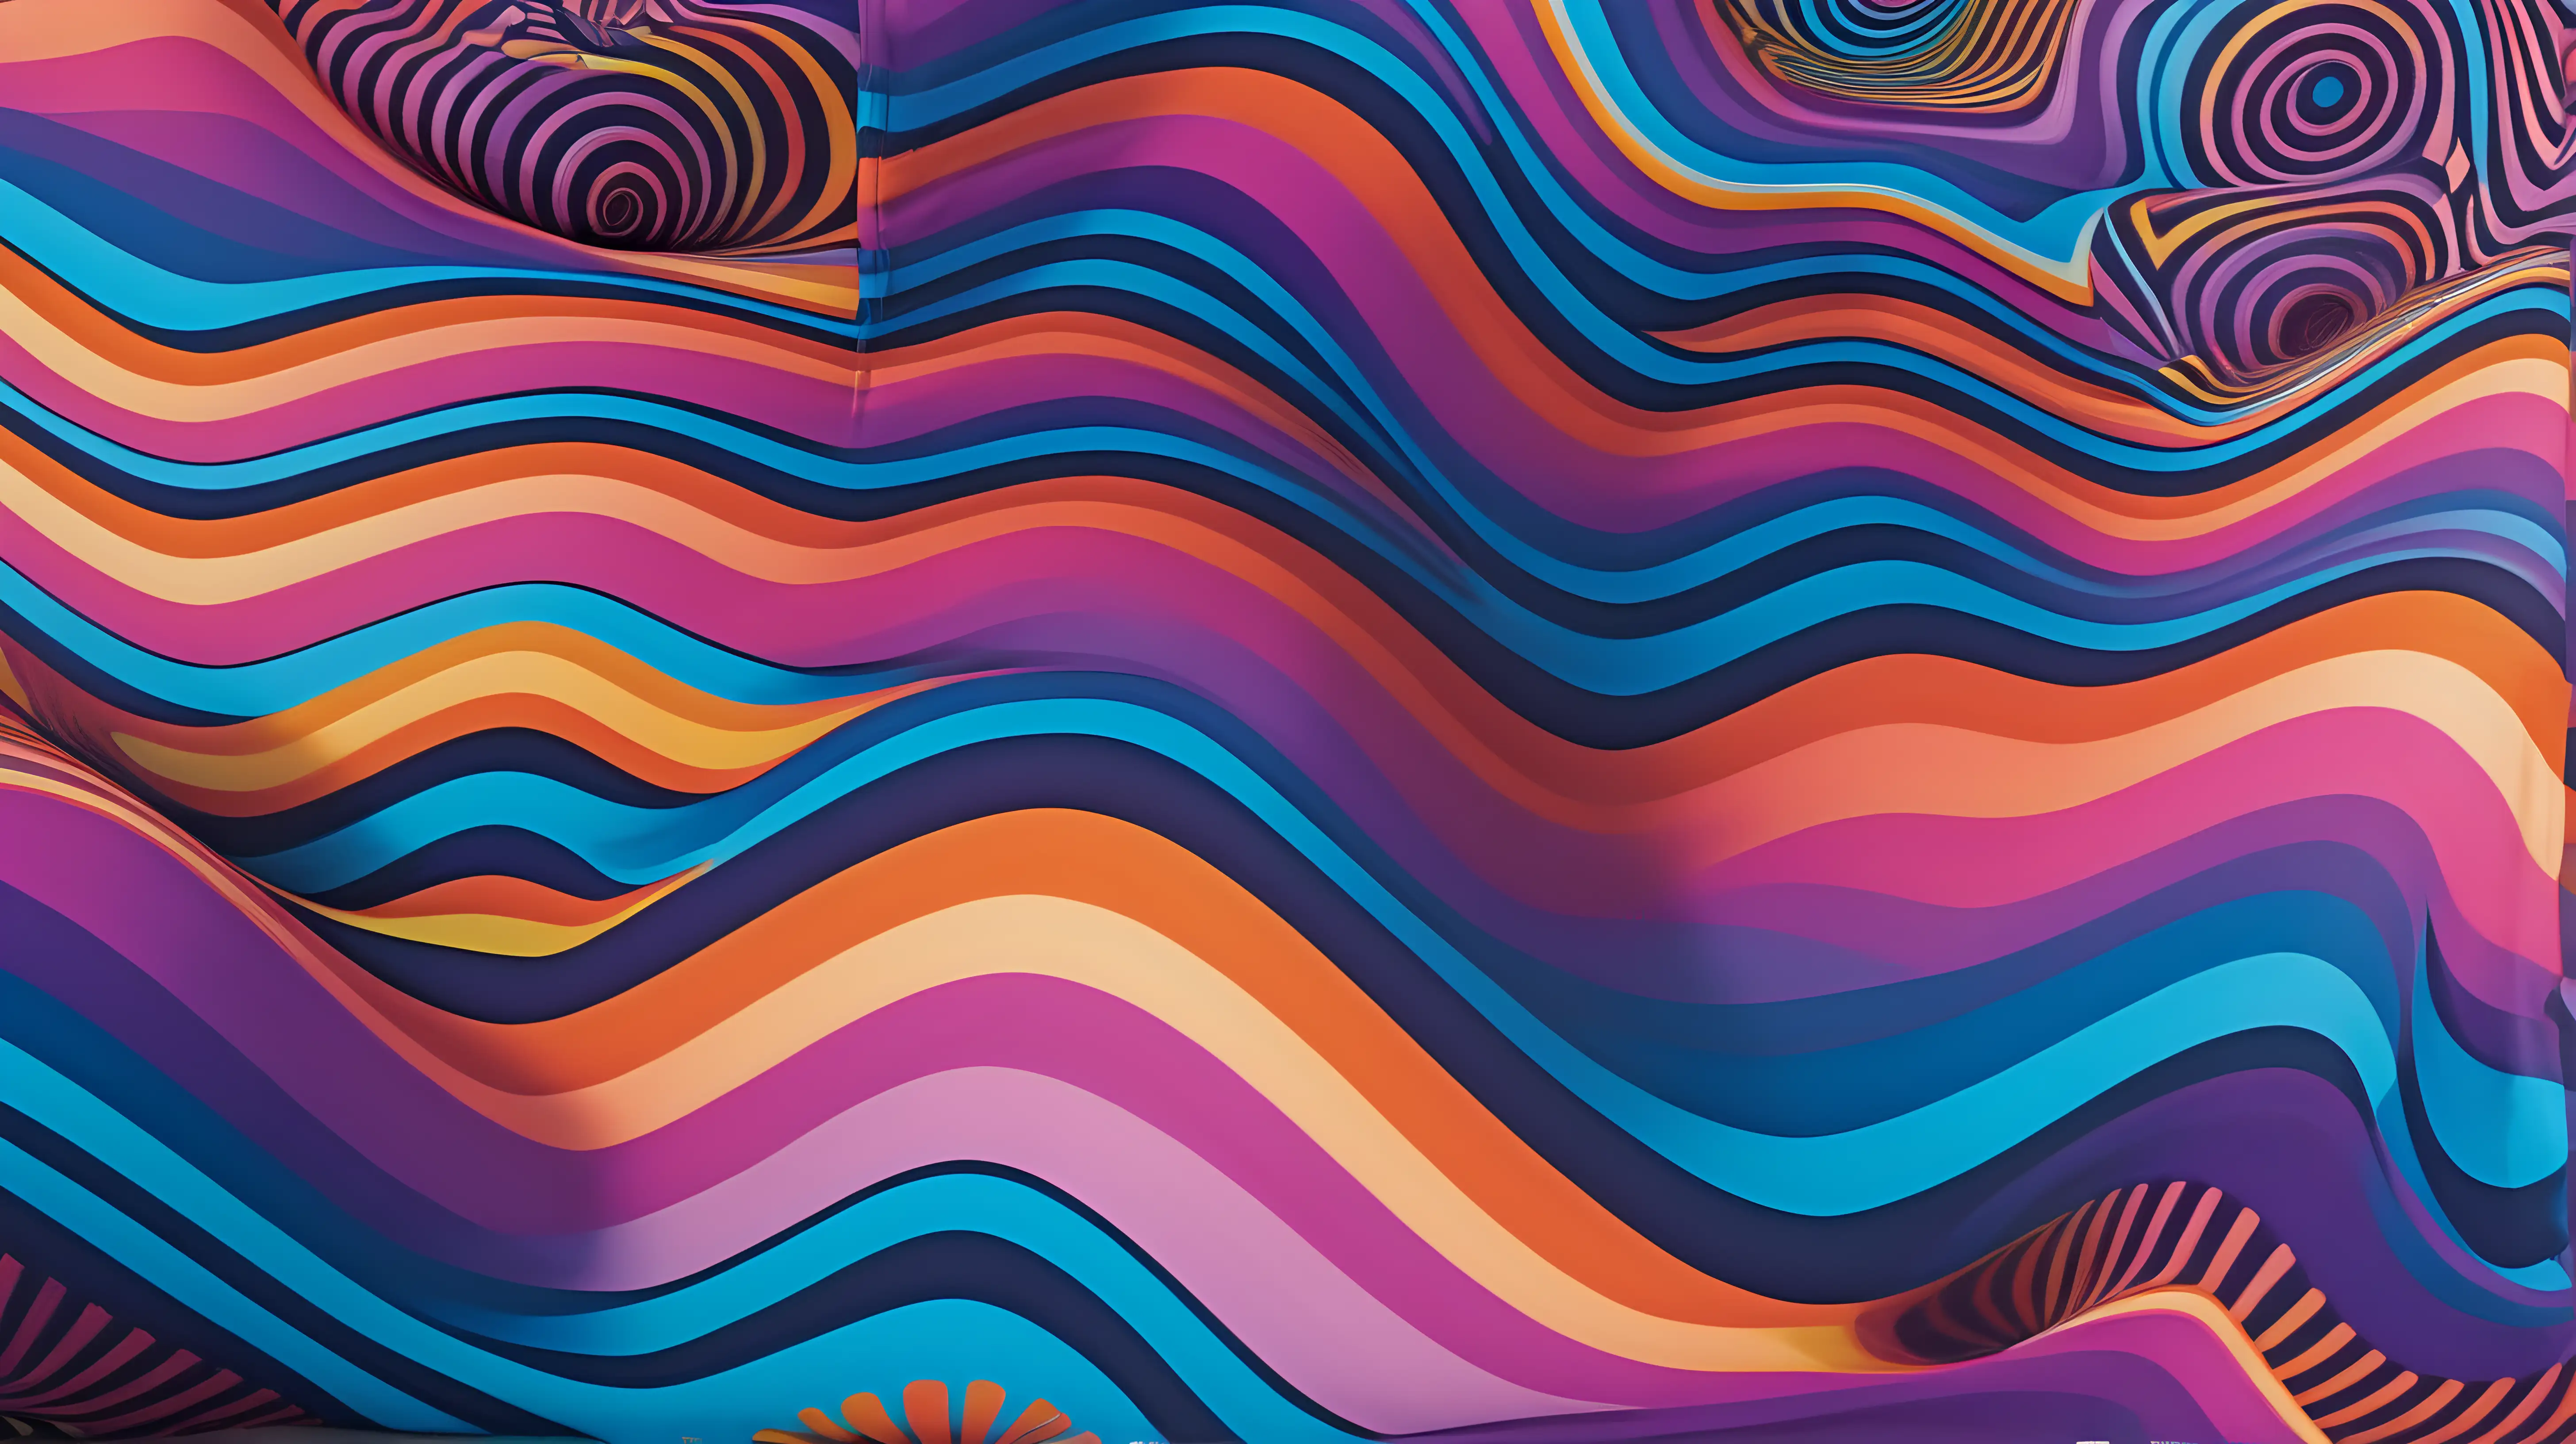 Vivid and contrasting hues blend in a hypnotic pattern, creating a psychedelic landscape. The design exudes energy and a sense of optical illusion.